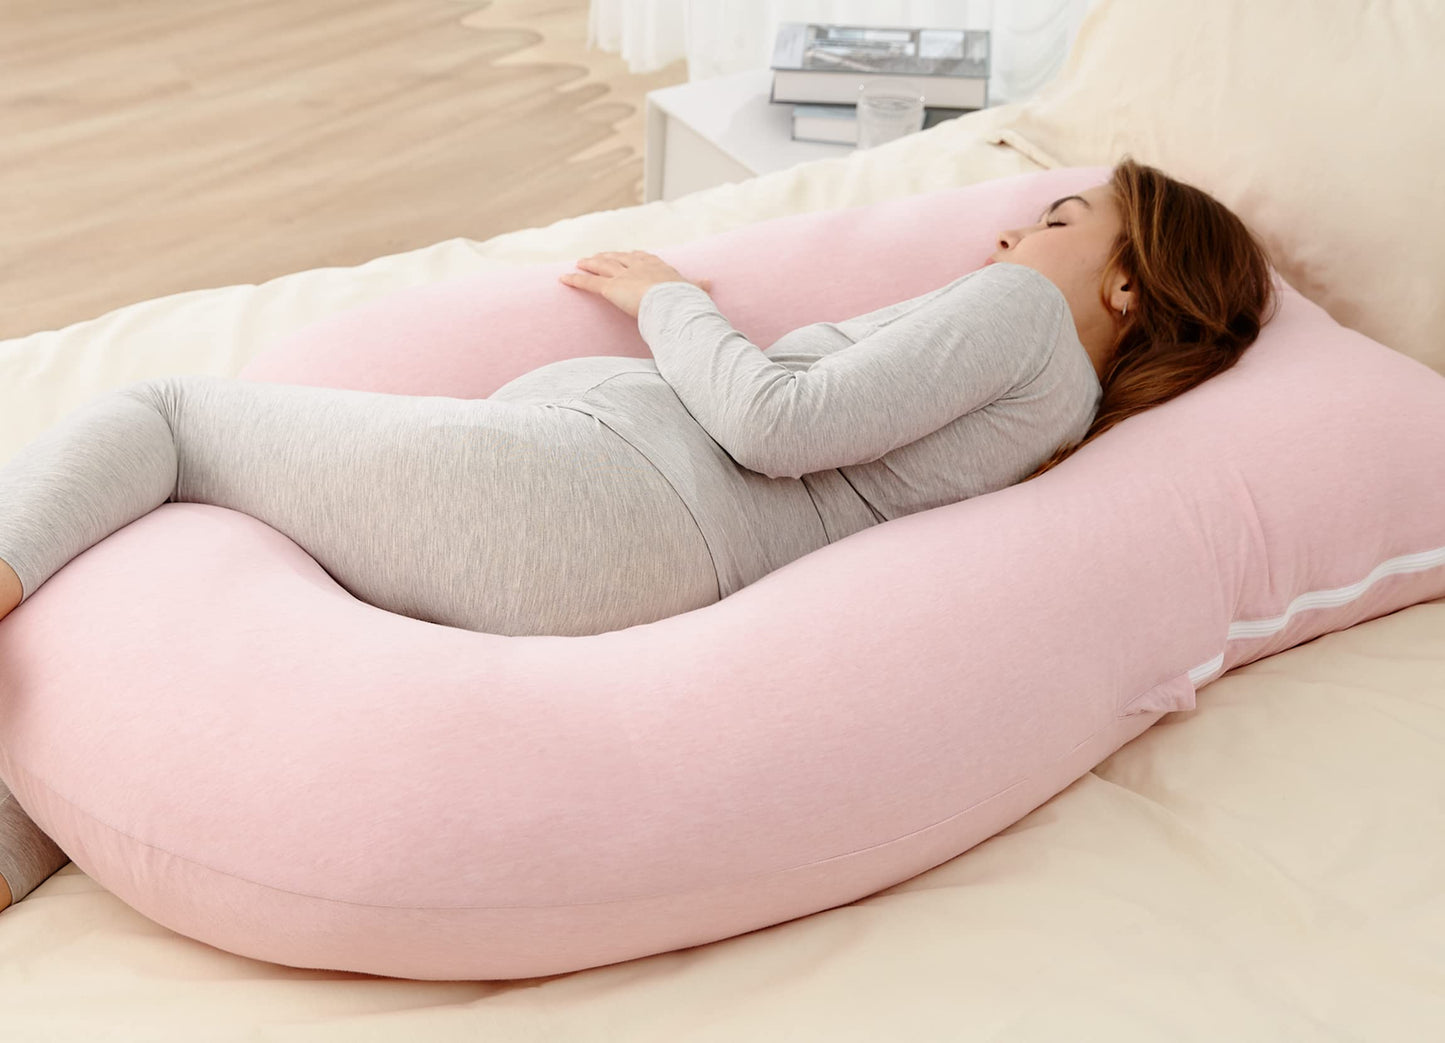 Momcozy Pregnancy Pillows for Sleeping, U Shaped Full Body Maternity Pillow for Side Sleeping - Support for Back, Legs, Belly, Hips, 57 Inch, Pink